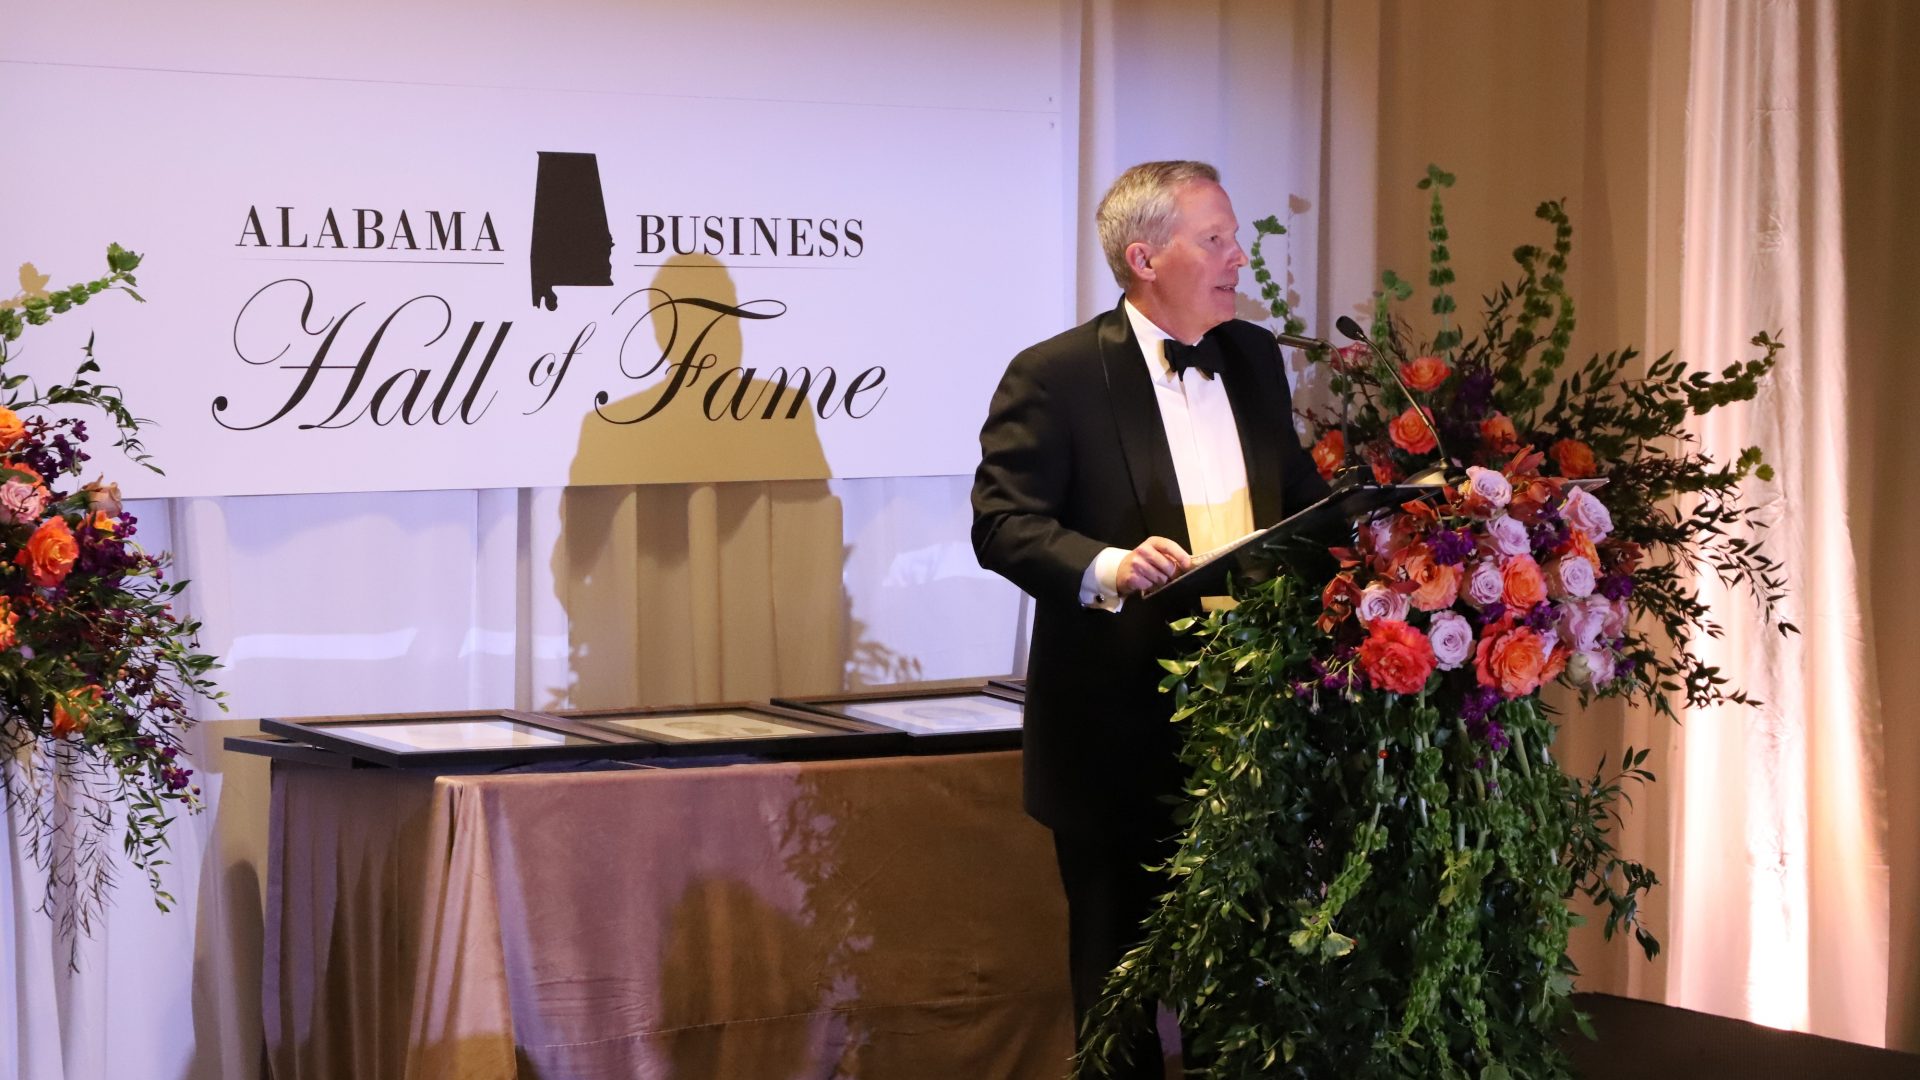 Mike Ross, Chairman of the Alabama Business Hall of Fame Board, welcomes guests